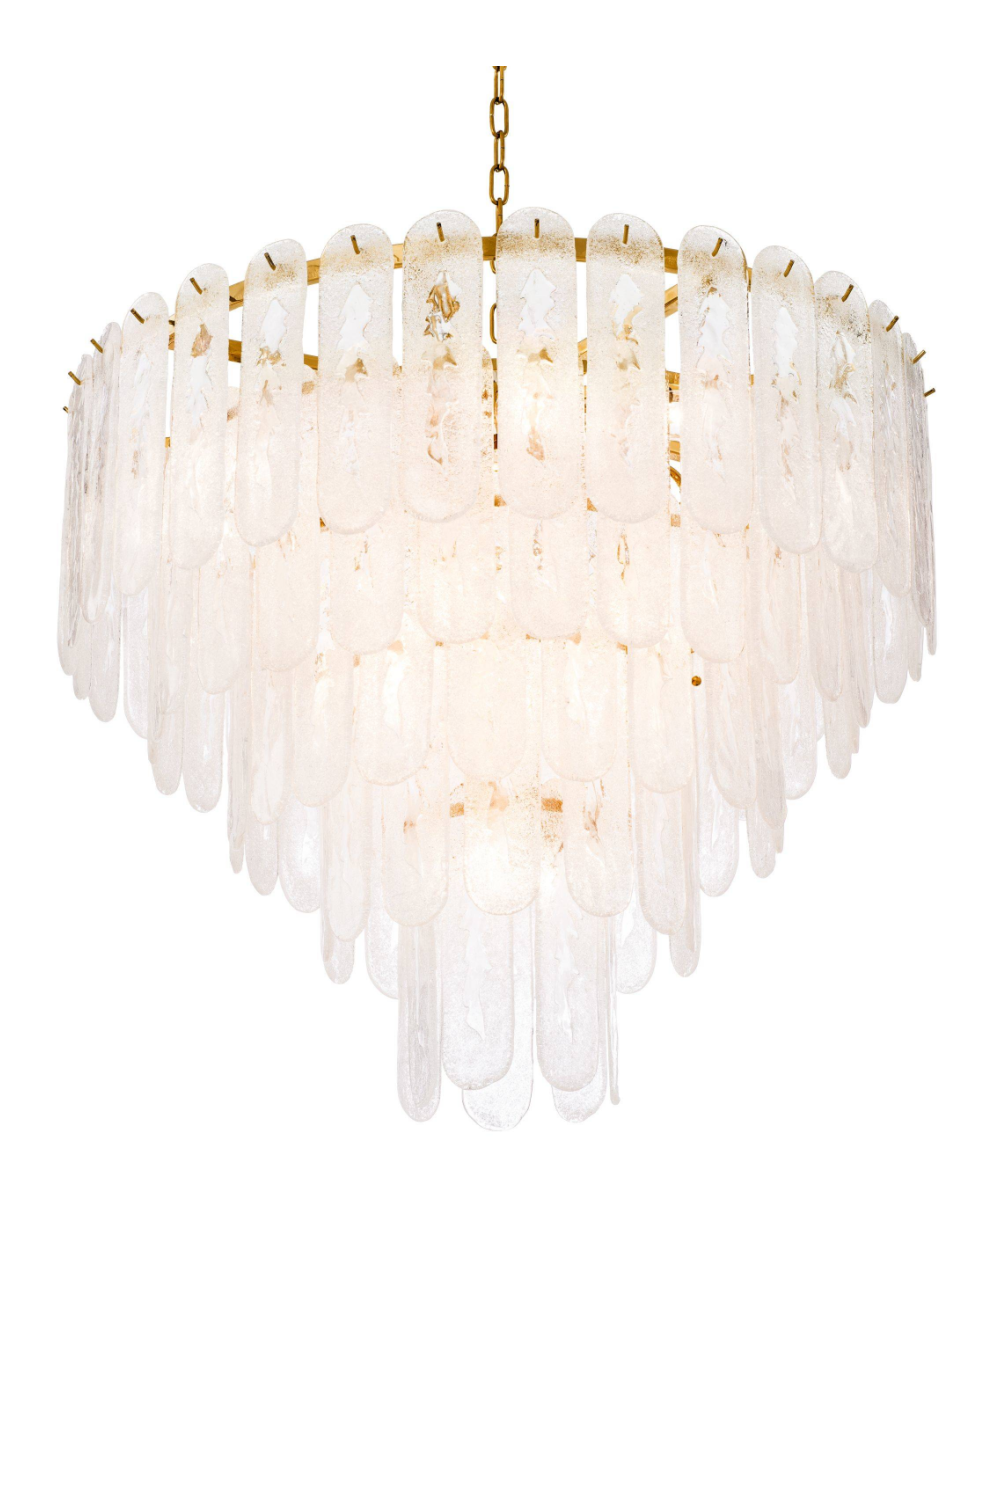 Frosted Glass Chandelier | Eichholtz Riveria | OROA